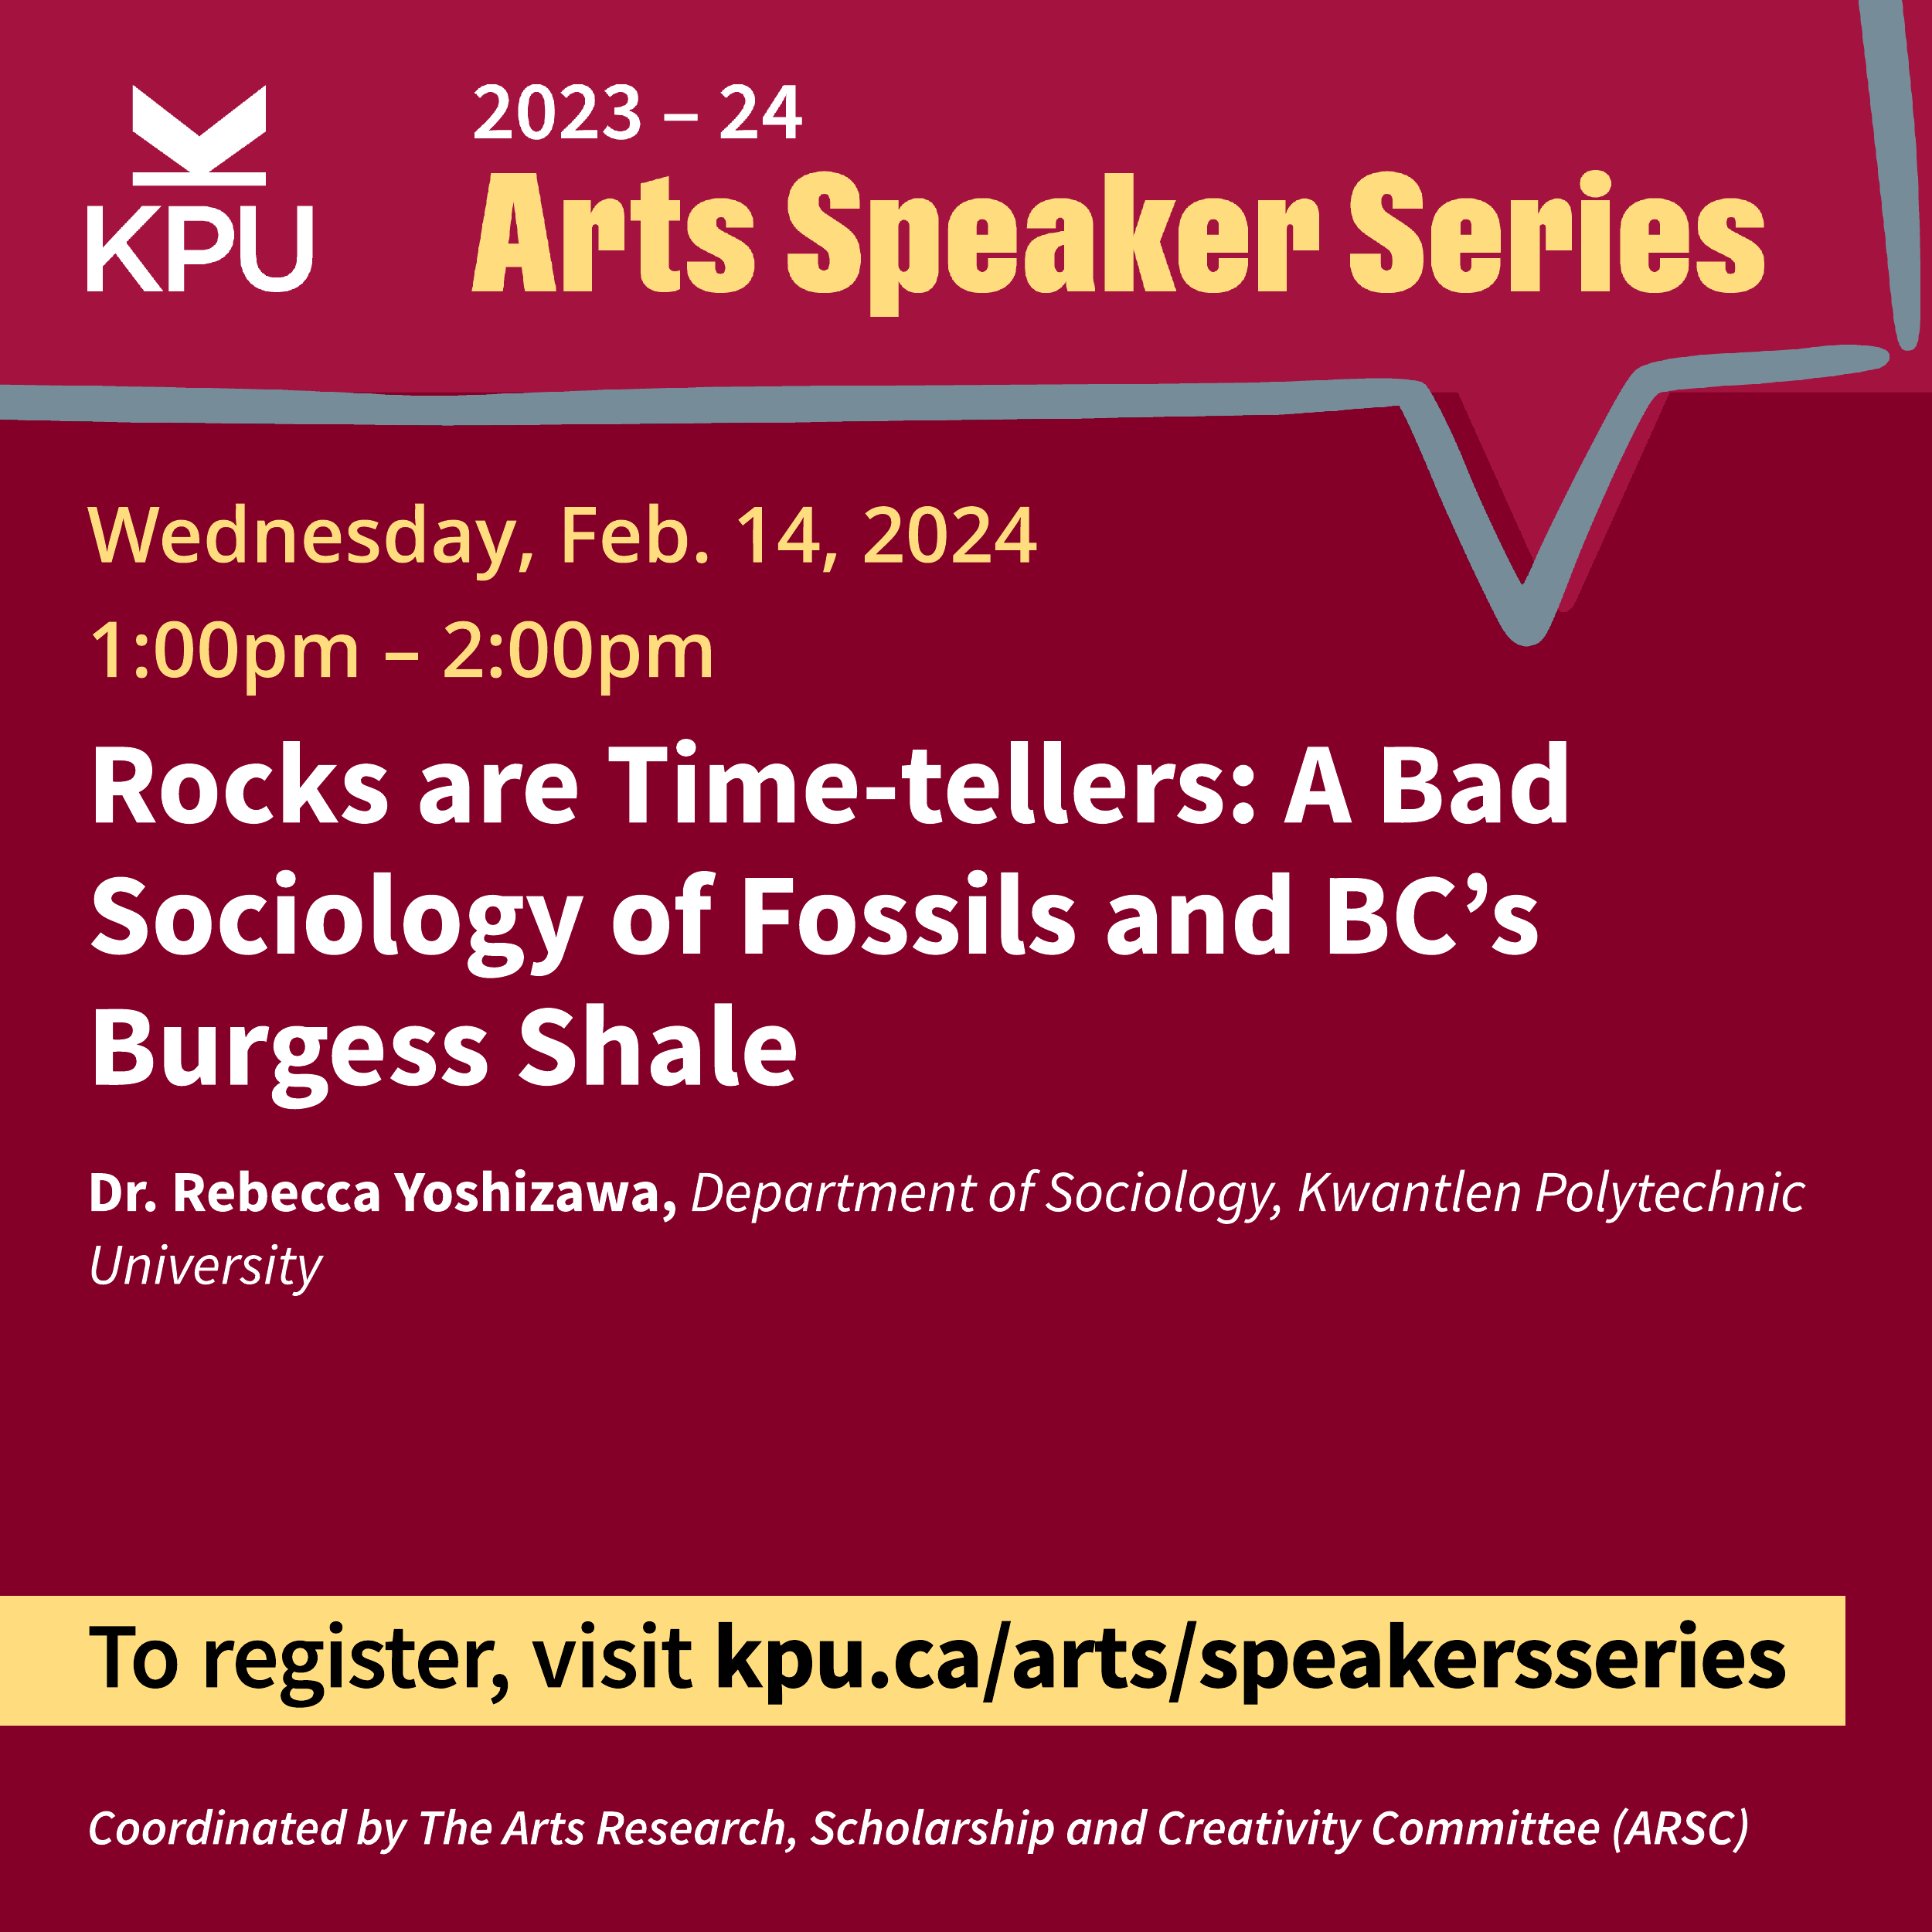 Arts Speaker Series: Feb. 14th Session. 1:00pm – 2:00pm. Rocks are Time-tellers: A Bad Sociology of Fossils and BC's Burgess Shale. Dr. Rebecca Yoshizawa, Department of Sociology, Kwantlen Polytechnic University